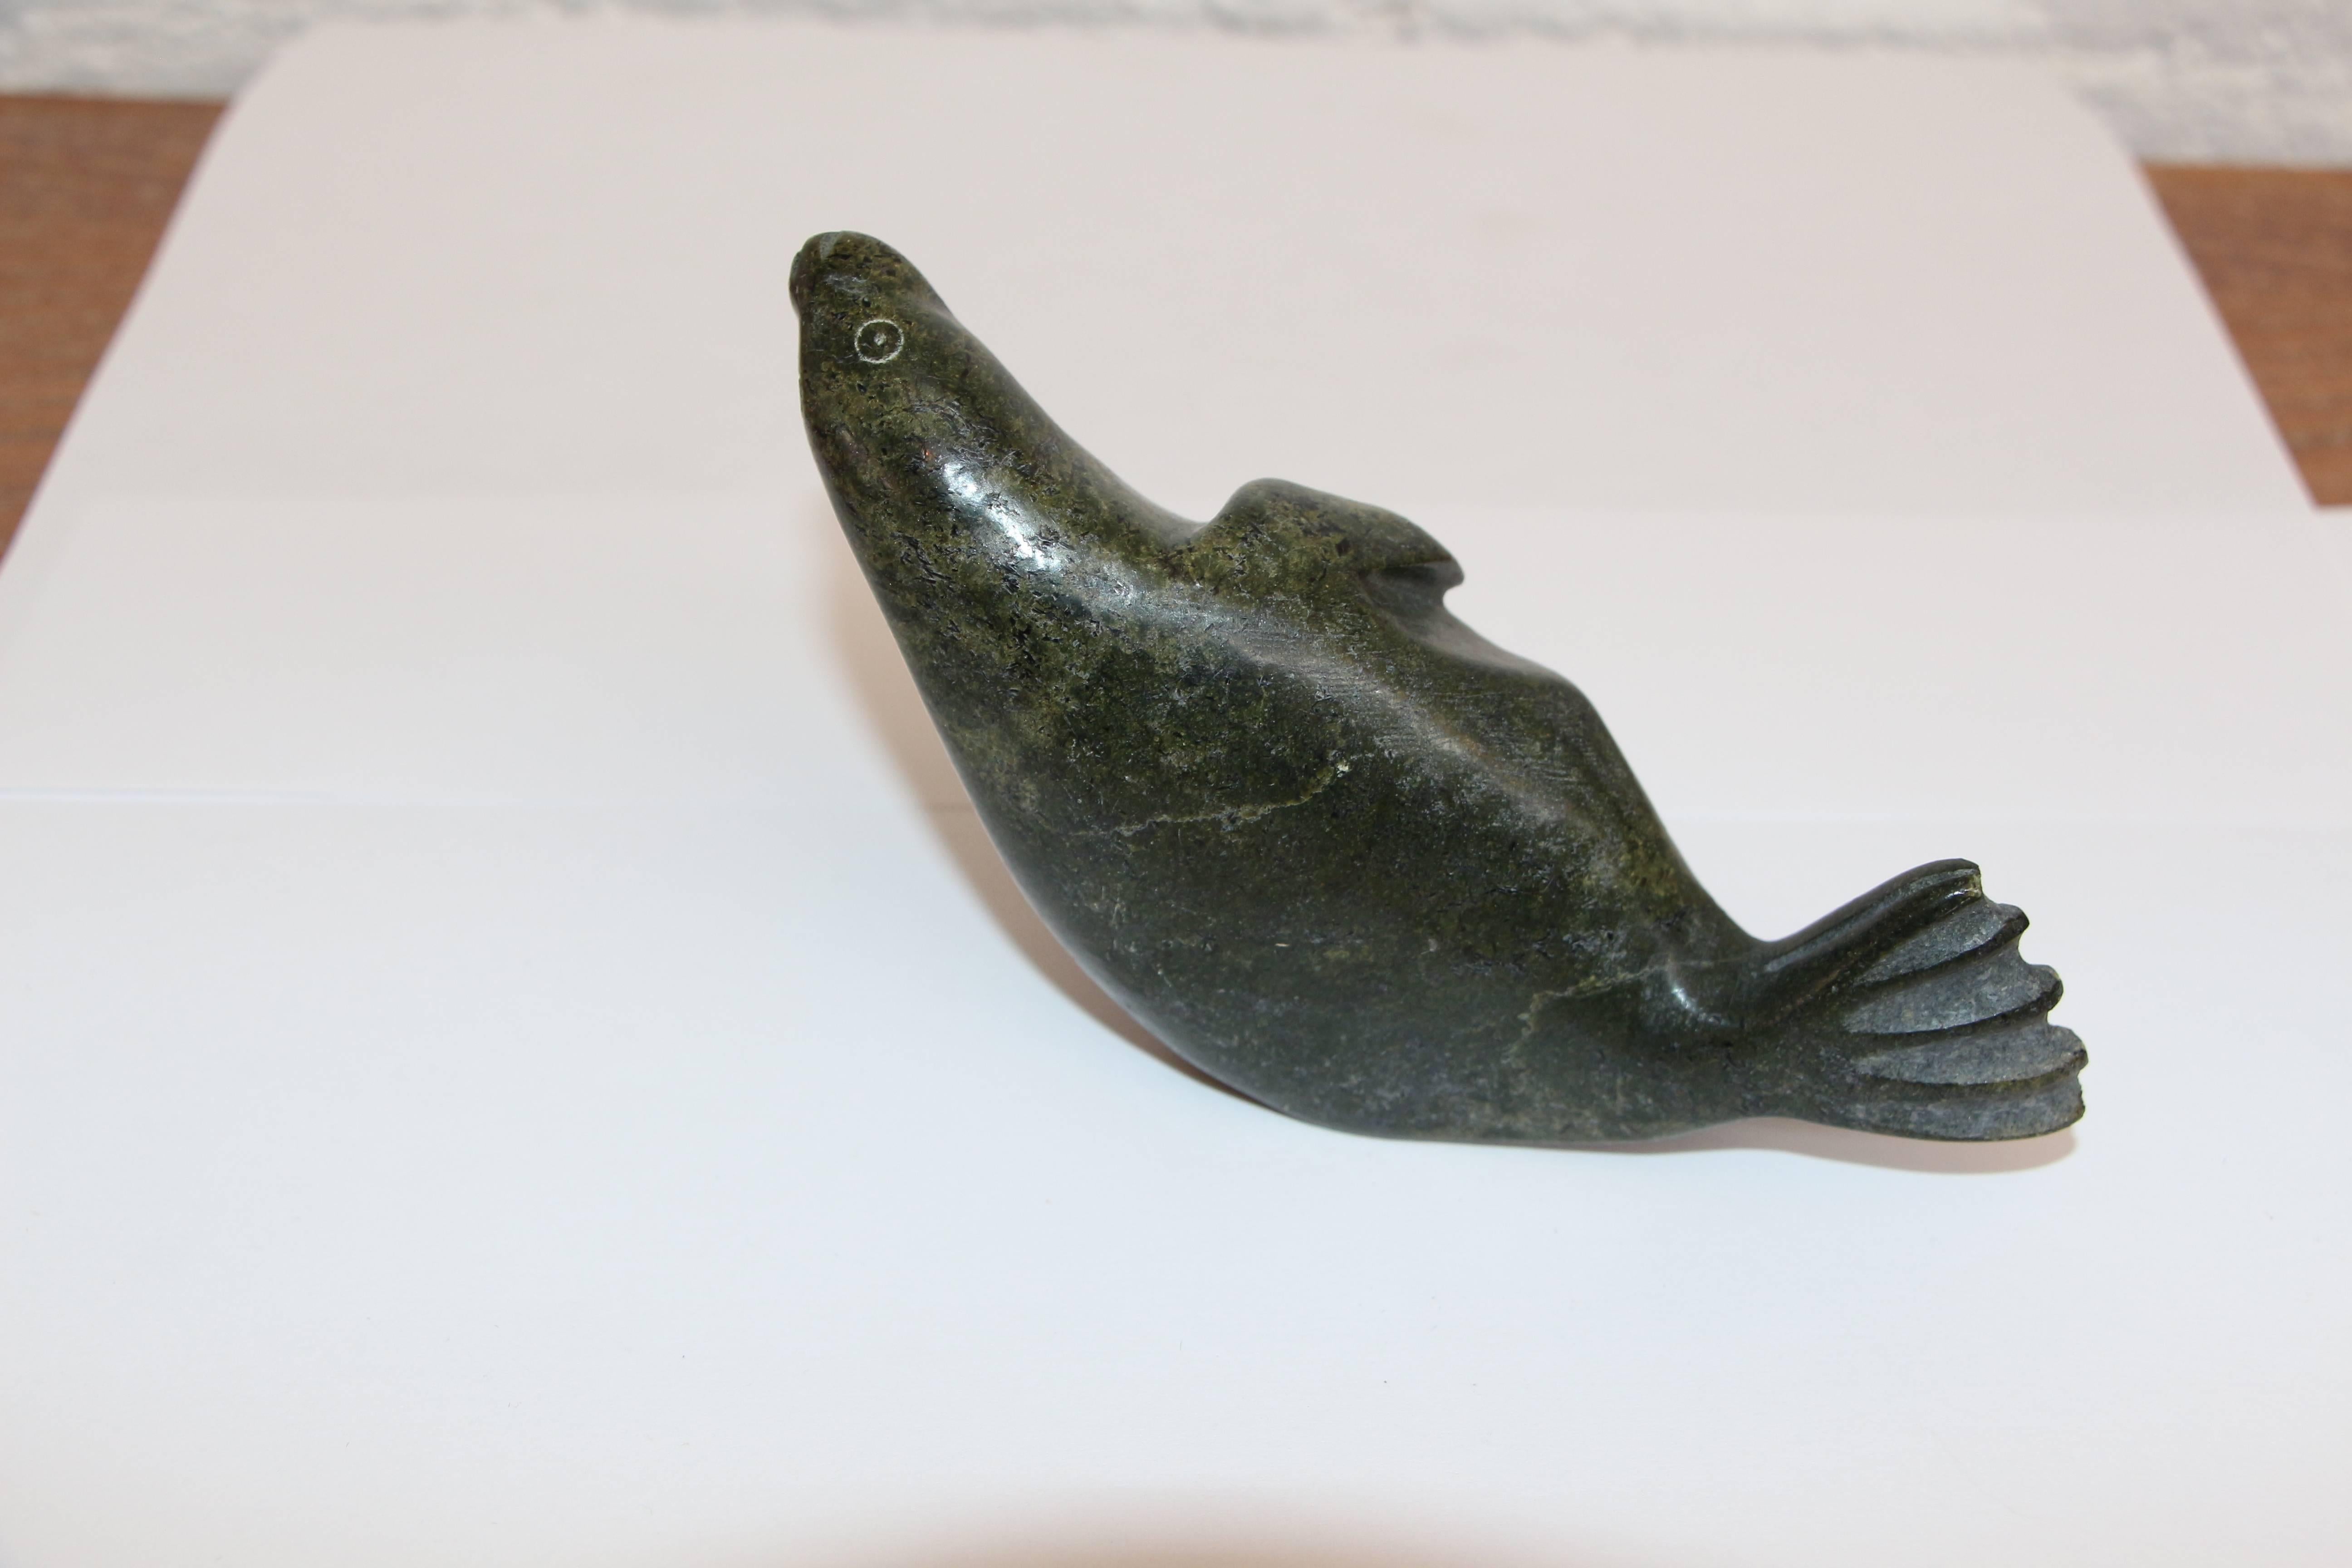 A nice duet of Eskimo or Inuit carvings of a walrus and a seal. They appear to be hardstone carvings. nice form and detail. The dark one is signed N Noah, and is approximately 5 inches long 1.5 inches deep and 3 inches tall. Size given is for the